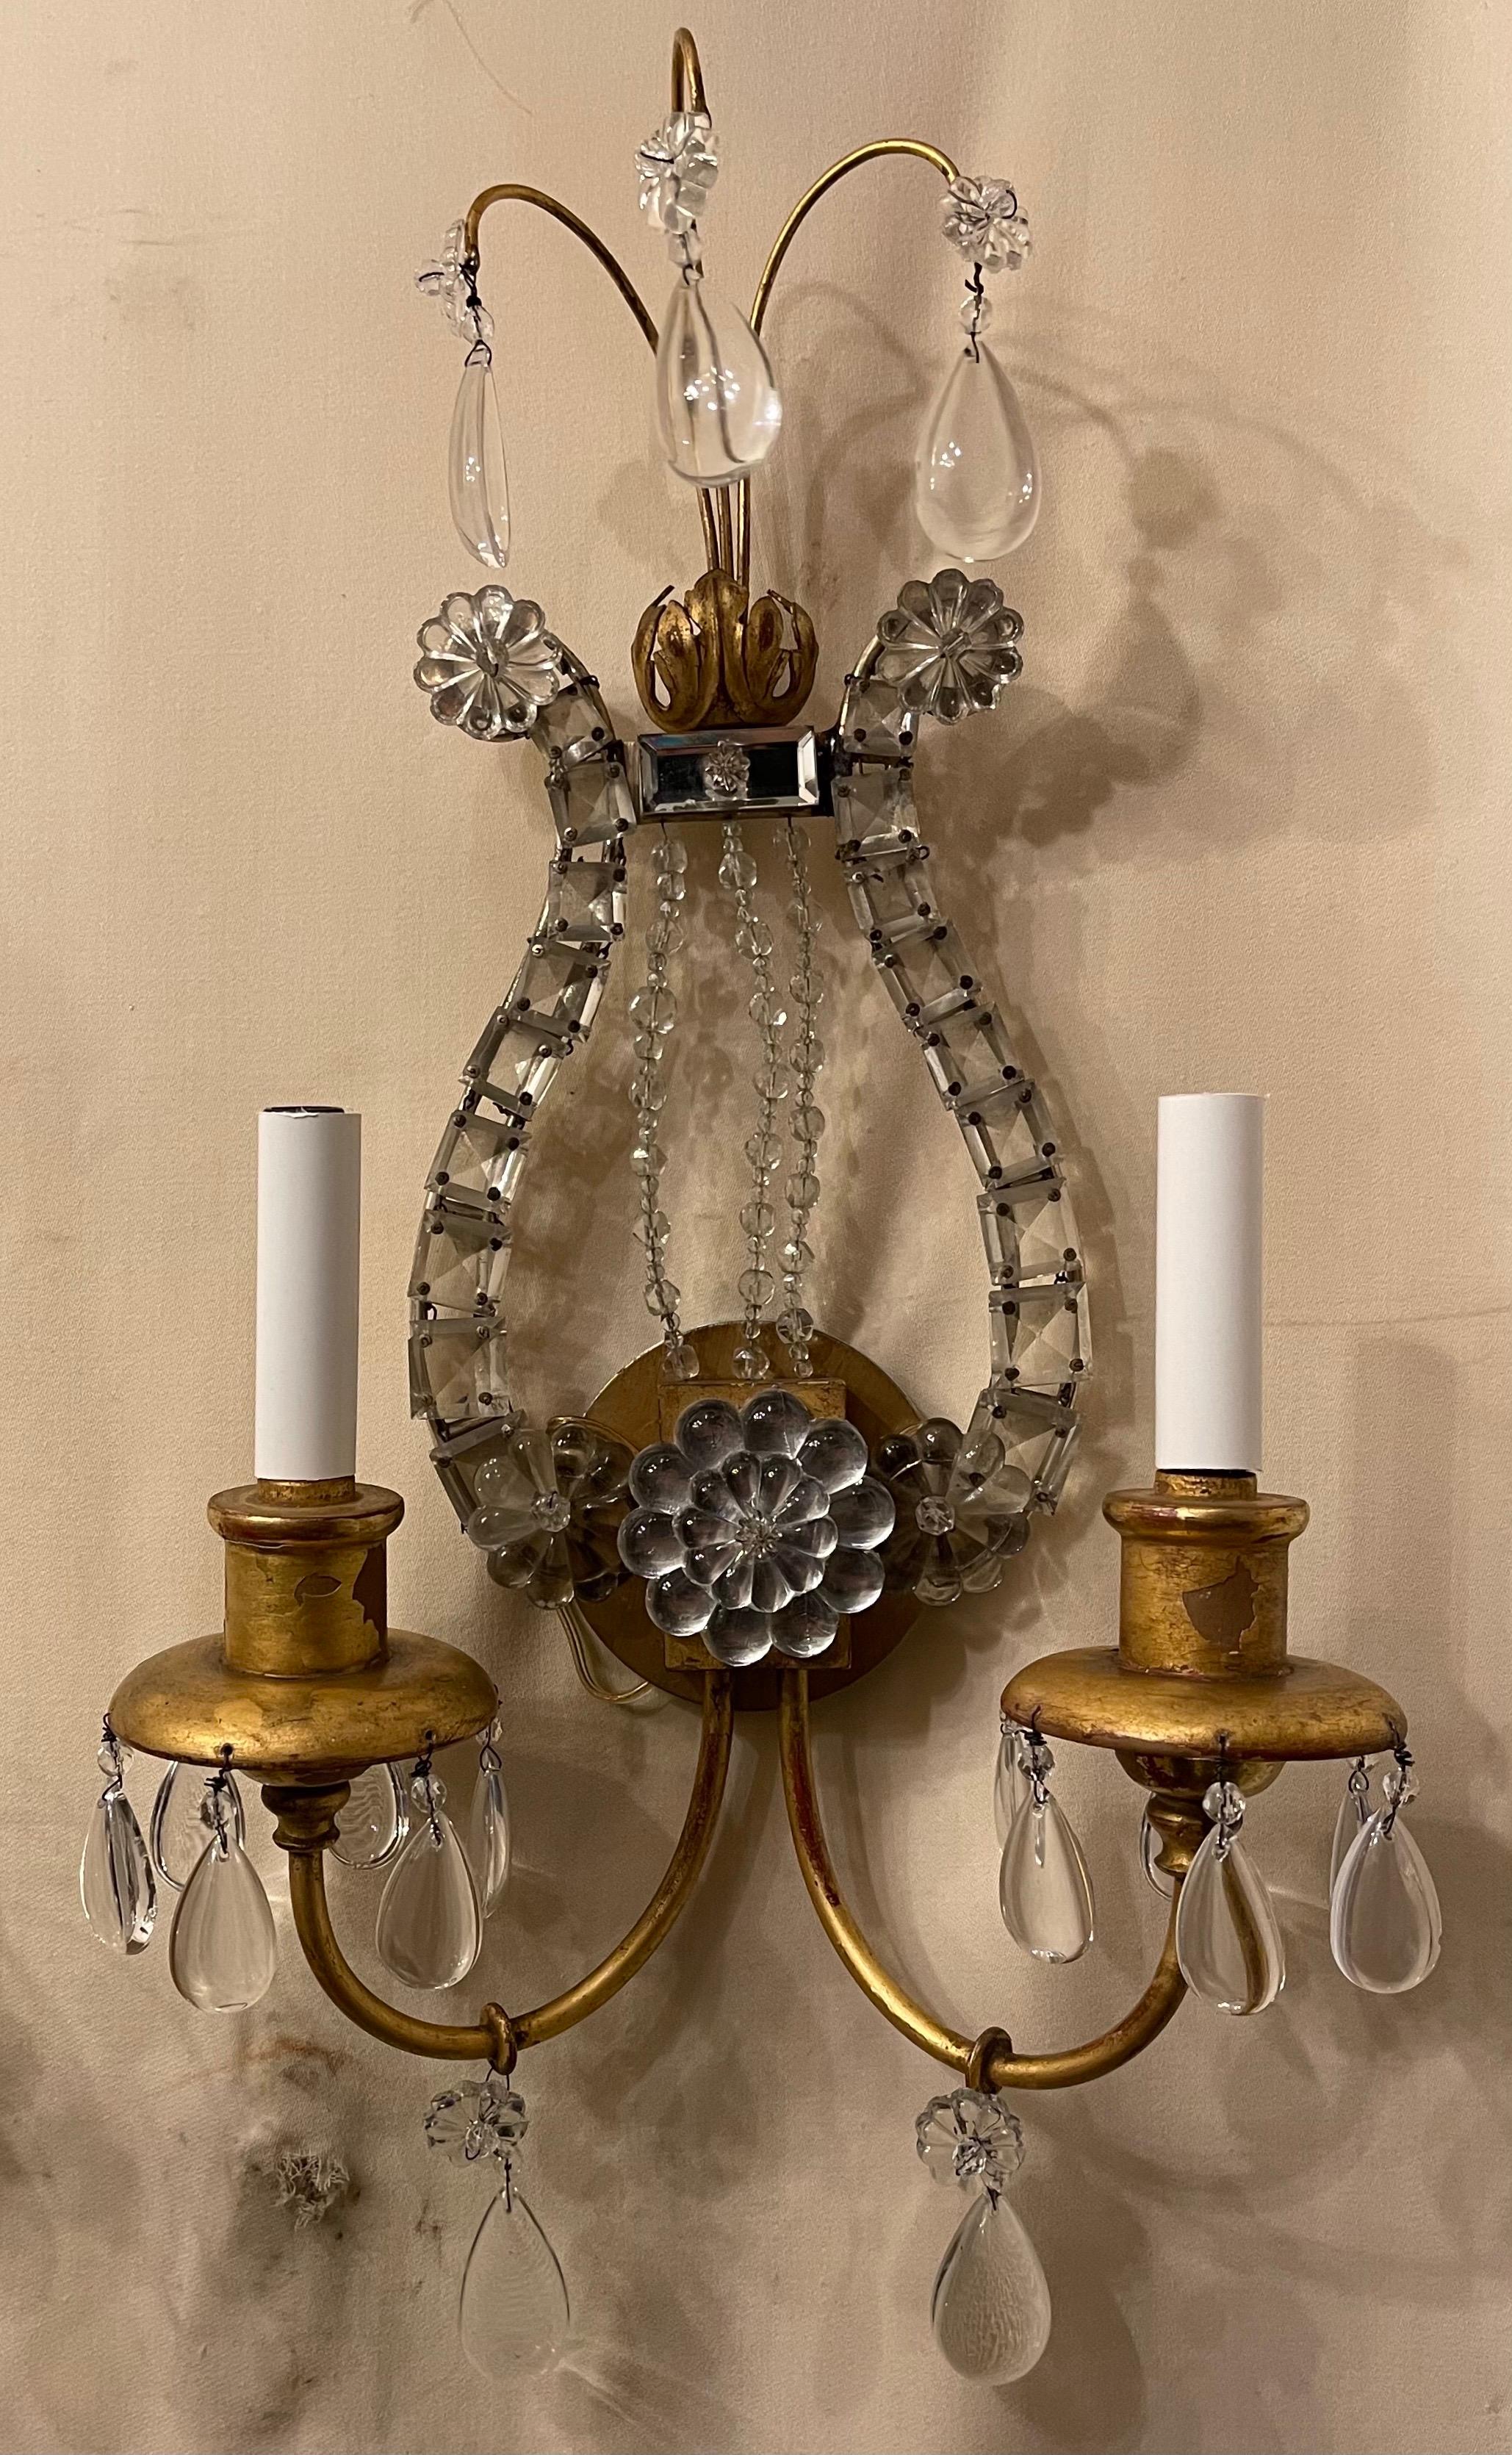 A wonderful pair of Bagues giltwood and crystal beaded harp back flower tole wall sconces
Completely rewired with new sockets.